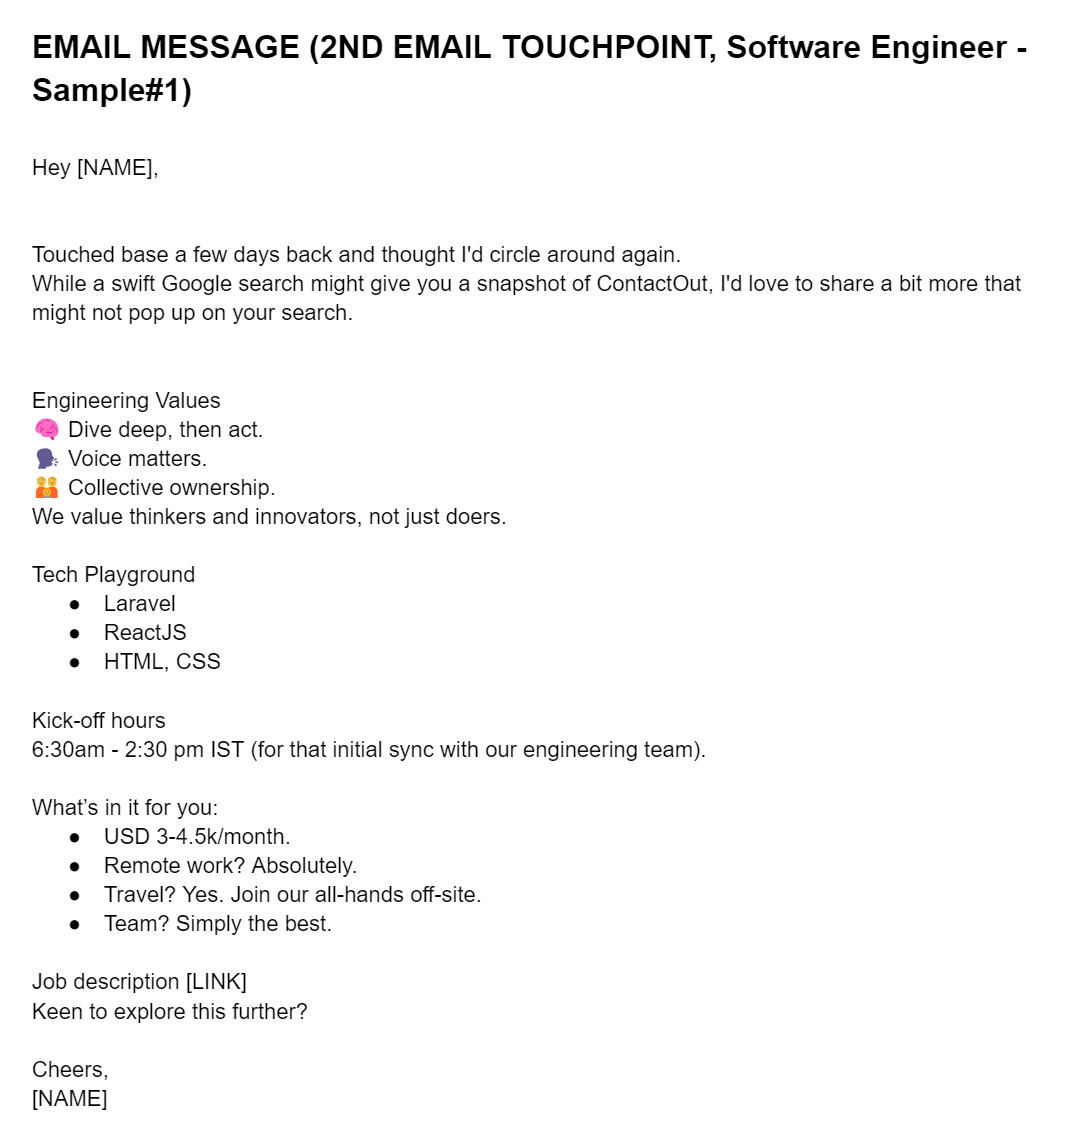 Email message (2nd touchpoint, software engineer sample 1)